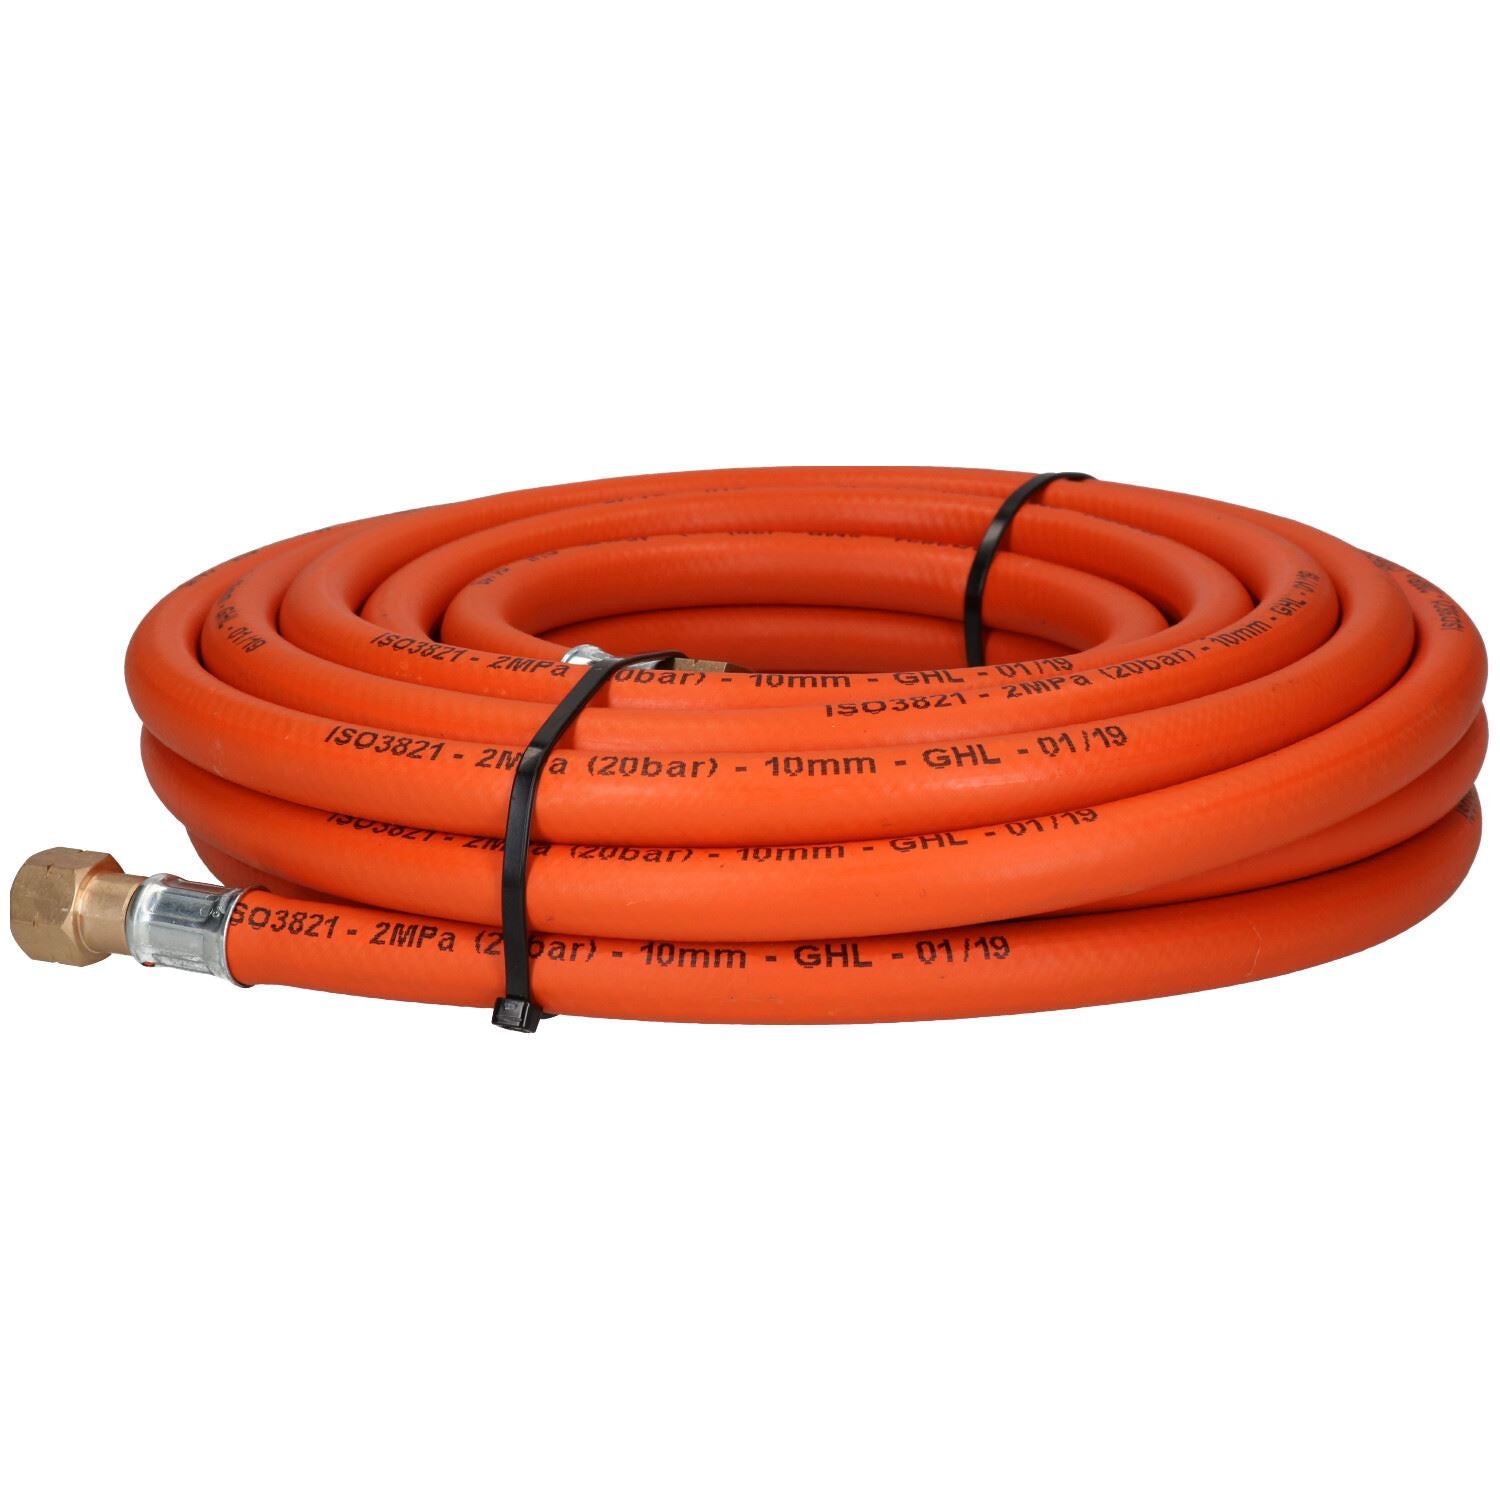 Single Propane Fitted Rubber Hose Pipe Cutting & Welding 10M 3/8" BSP Gas